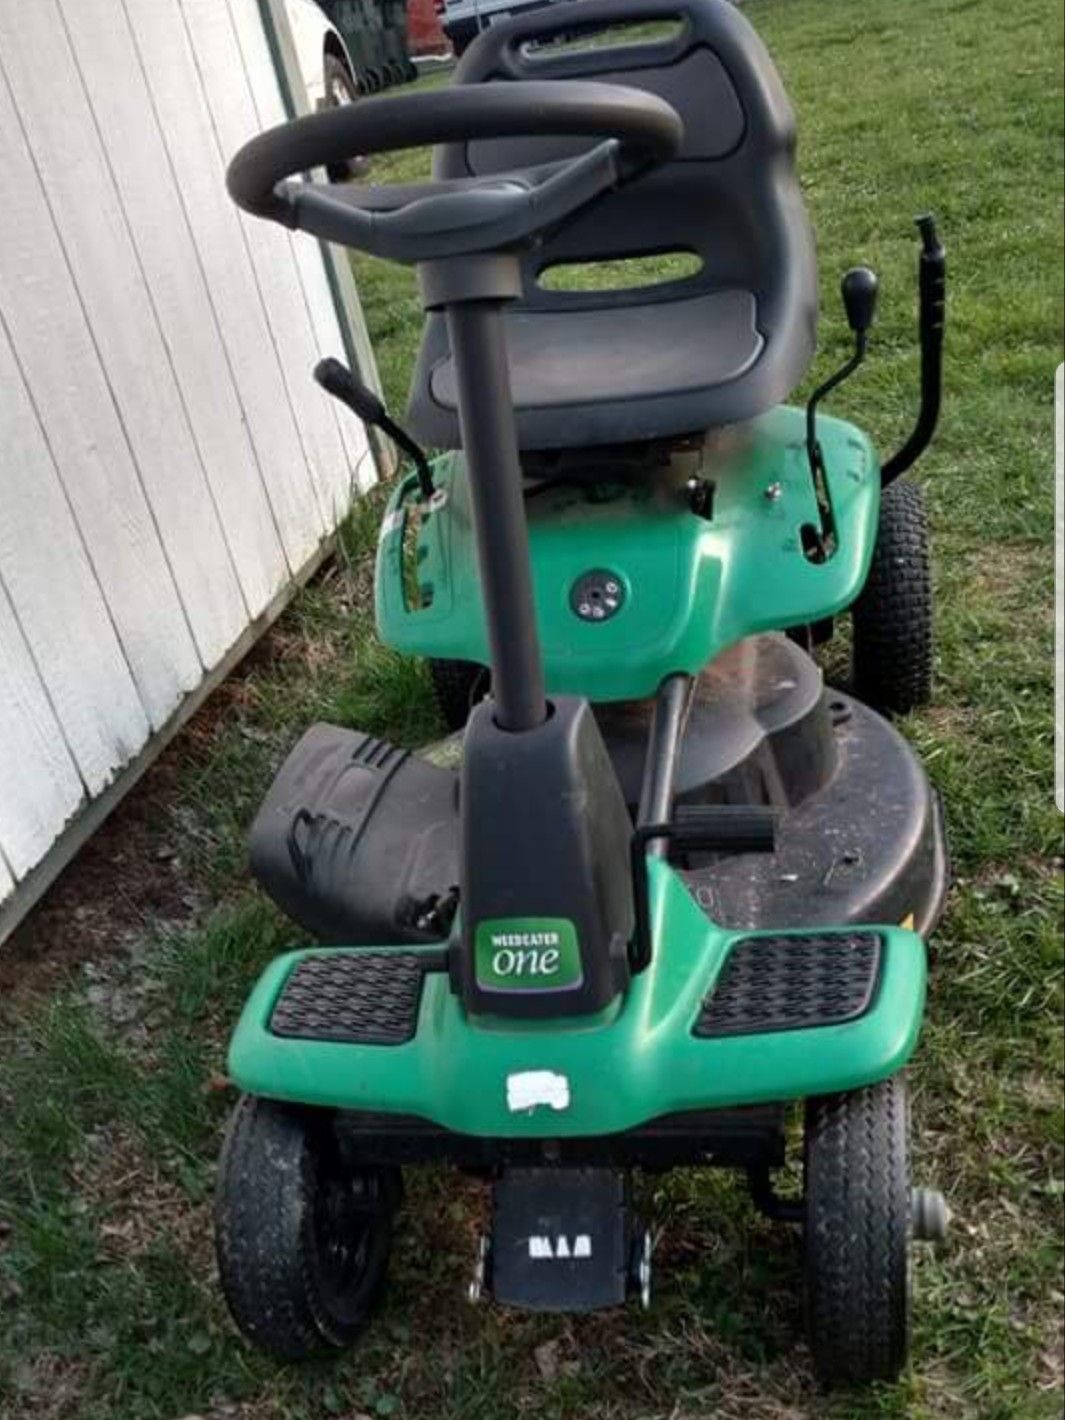 Weed eater riding lawn mower